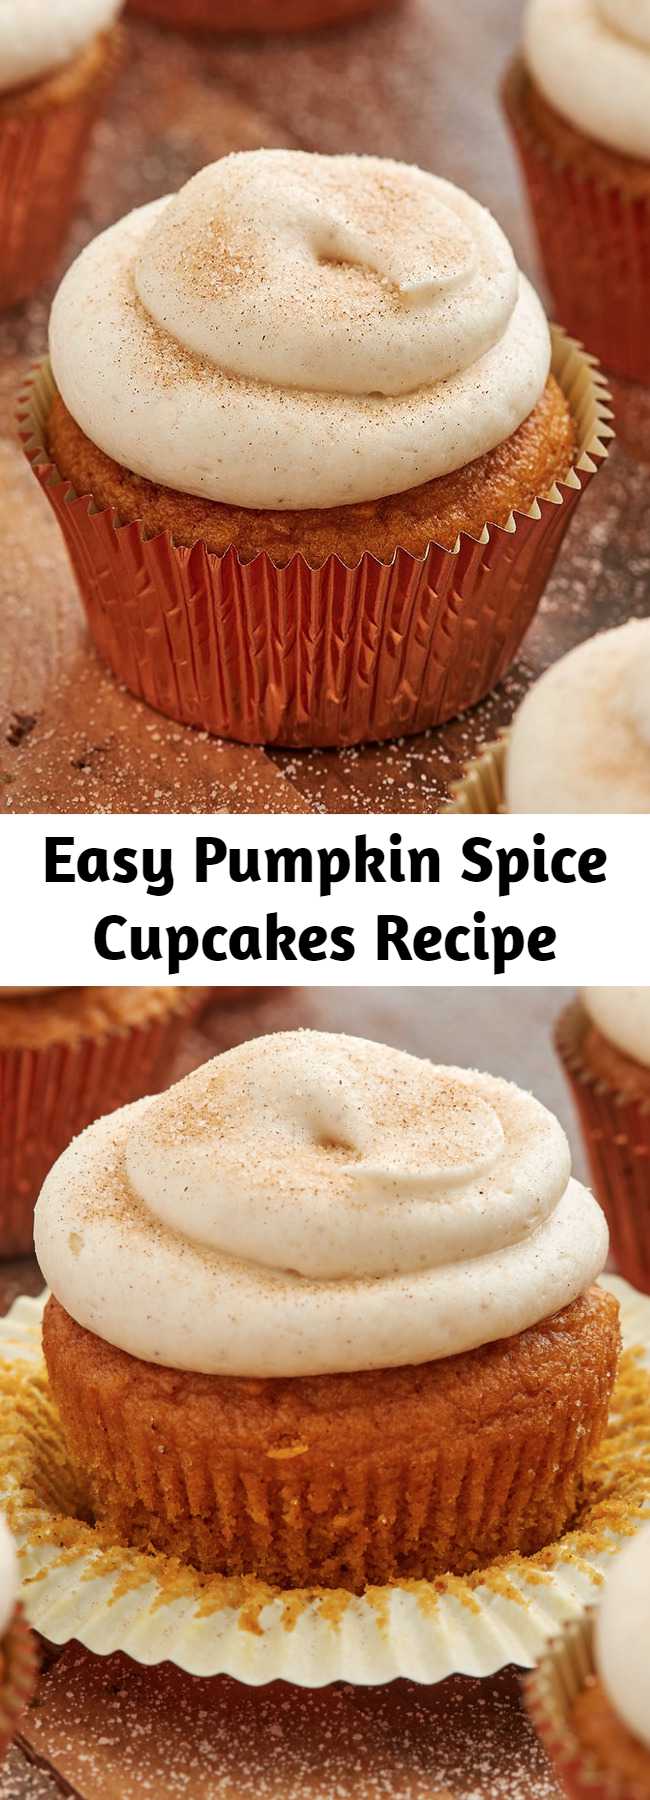 Easy Pumpkin Spice Cupcakes Recipe - If you are looking for a perfect pumpkin cupcake, look no further. These easy sweets are full of pumpkin spice and topped with a simple cream cheese frosting. We love it topped with some cinnamon sugar, but more pumpkin spice would also be delicious. Put these on the top of your baking list this fall! 